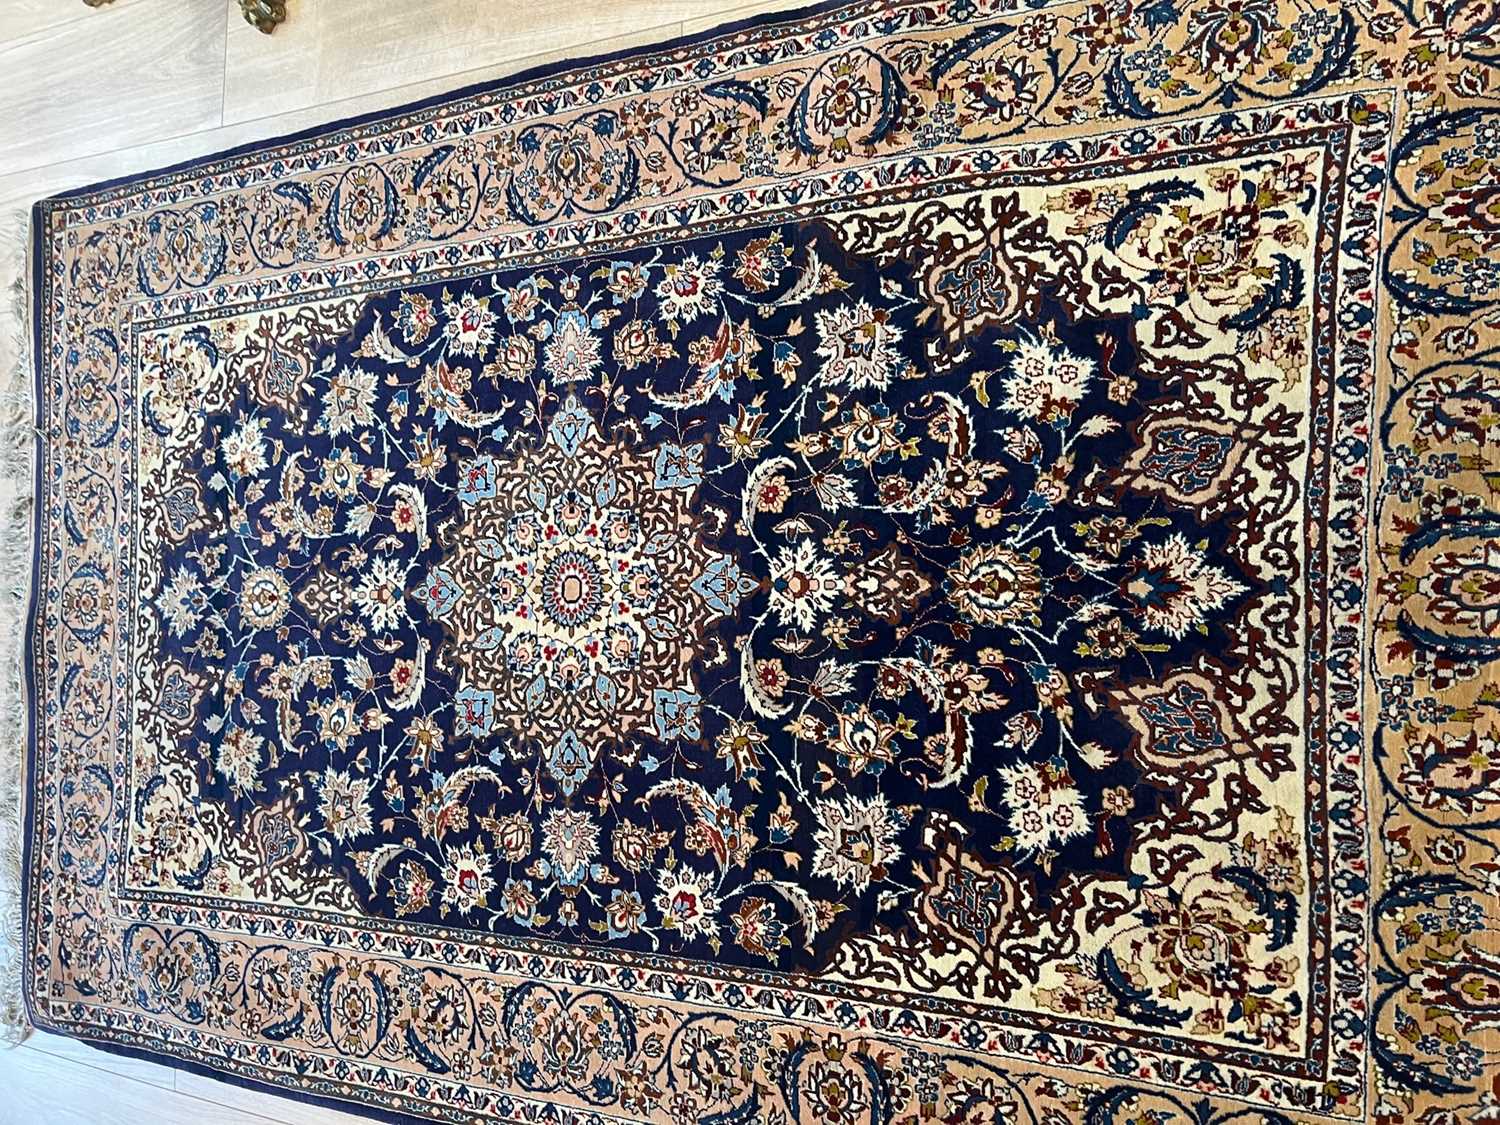 A FINE PART SILK ISFAHAN CARPET, NORTH WEST PERSIA - Image 9 of 9